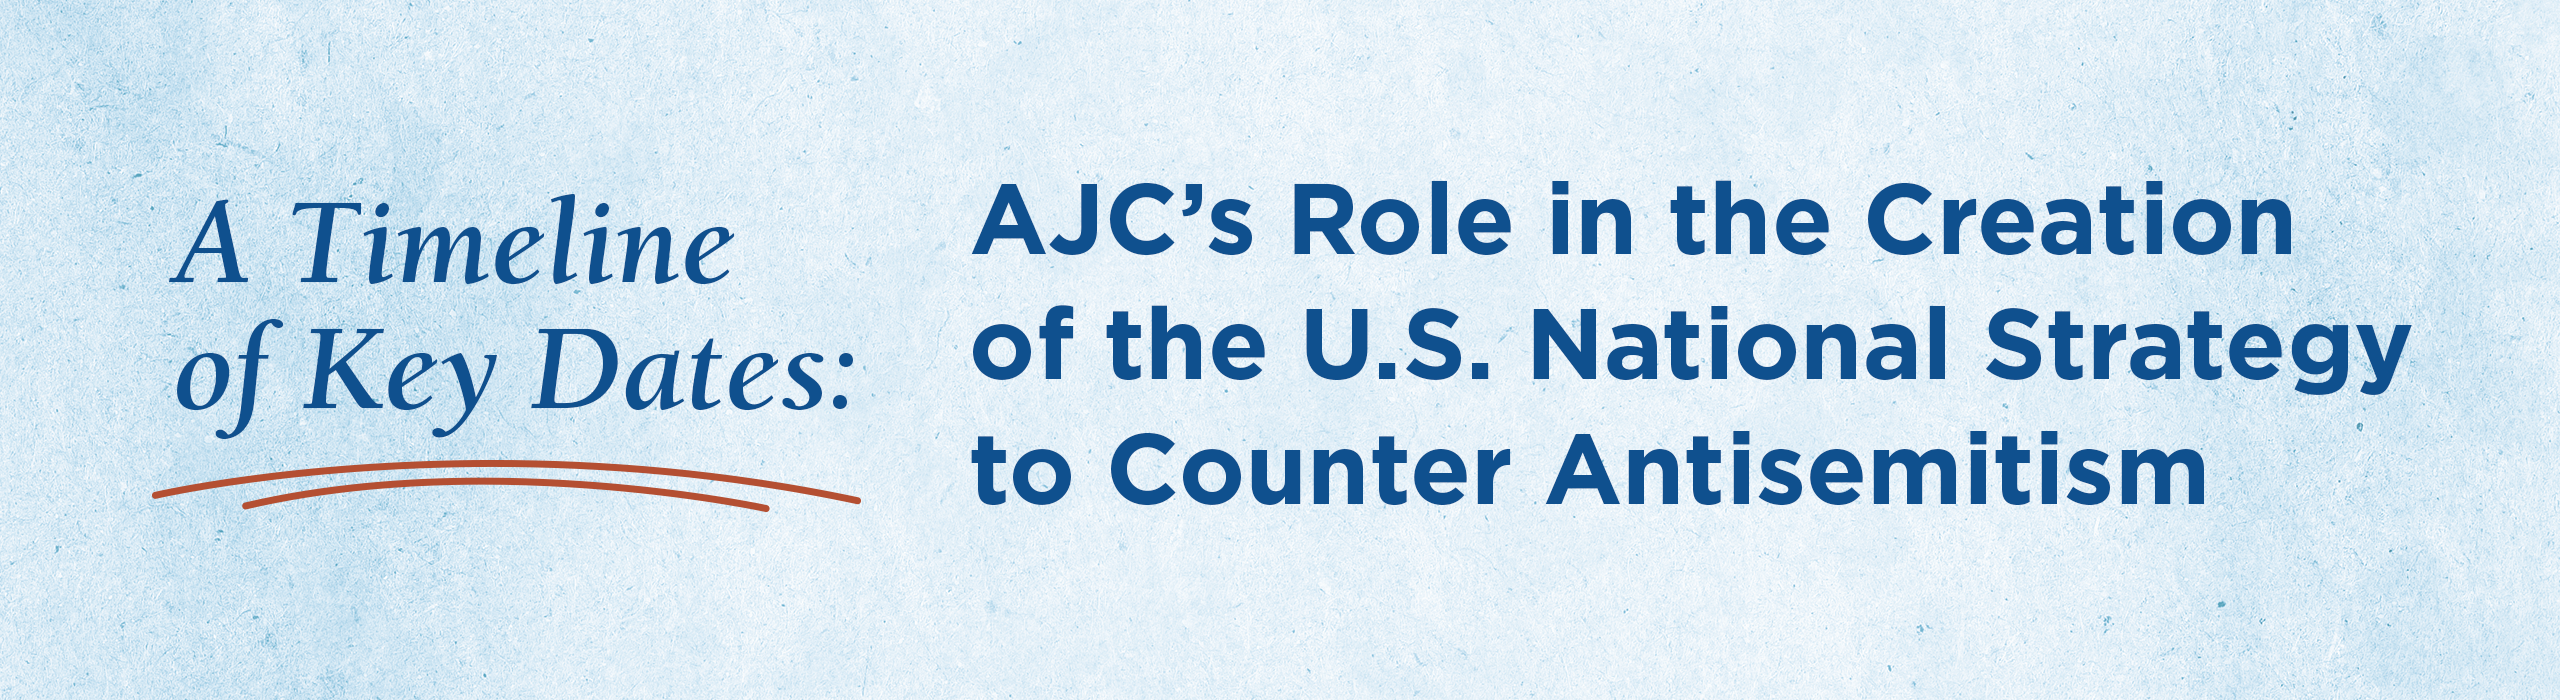 A Timeline of Key Dates - AJC's Role in the Creation of the U.S. National Strategy to Counter Antisemitism